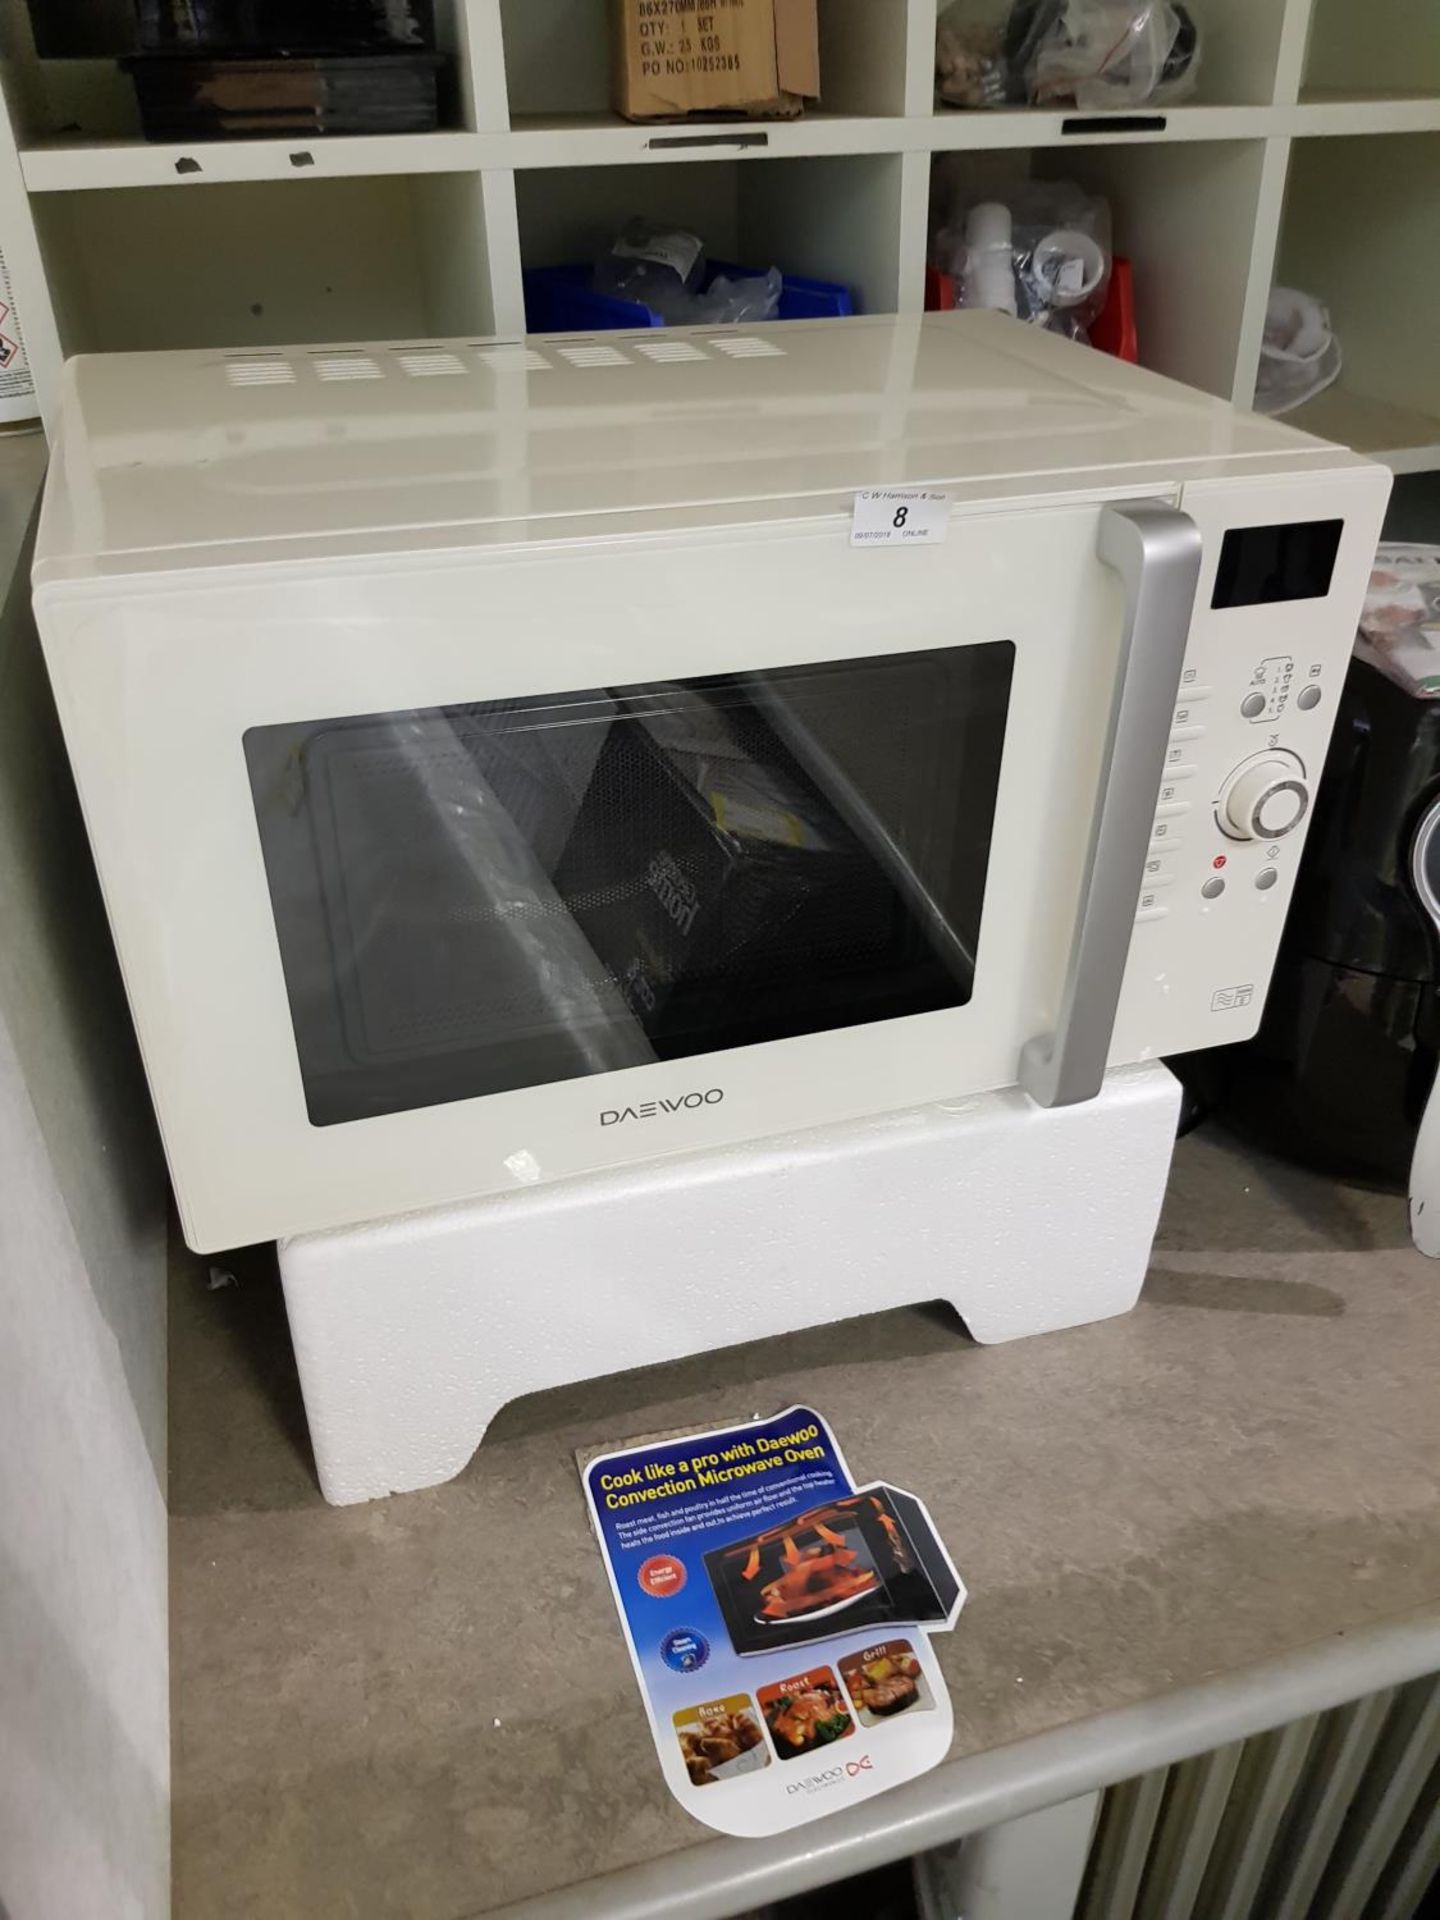 Daewoo Convection Microwave Oven - Cream